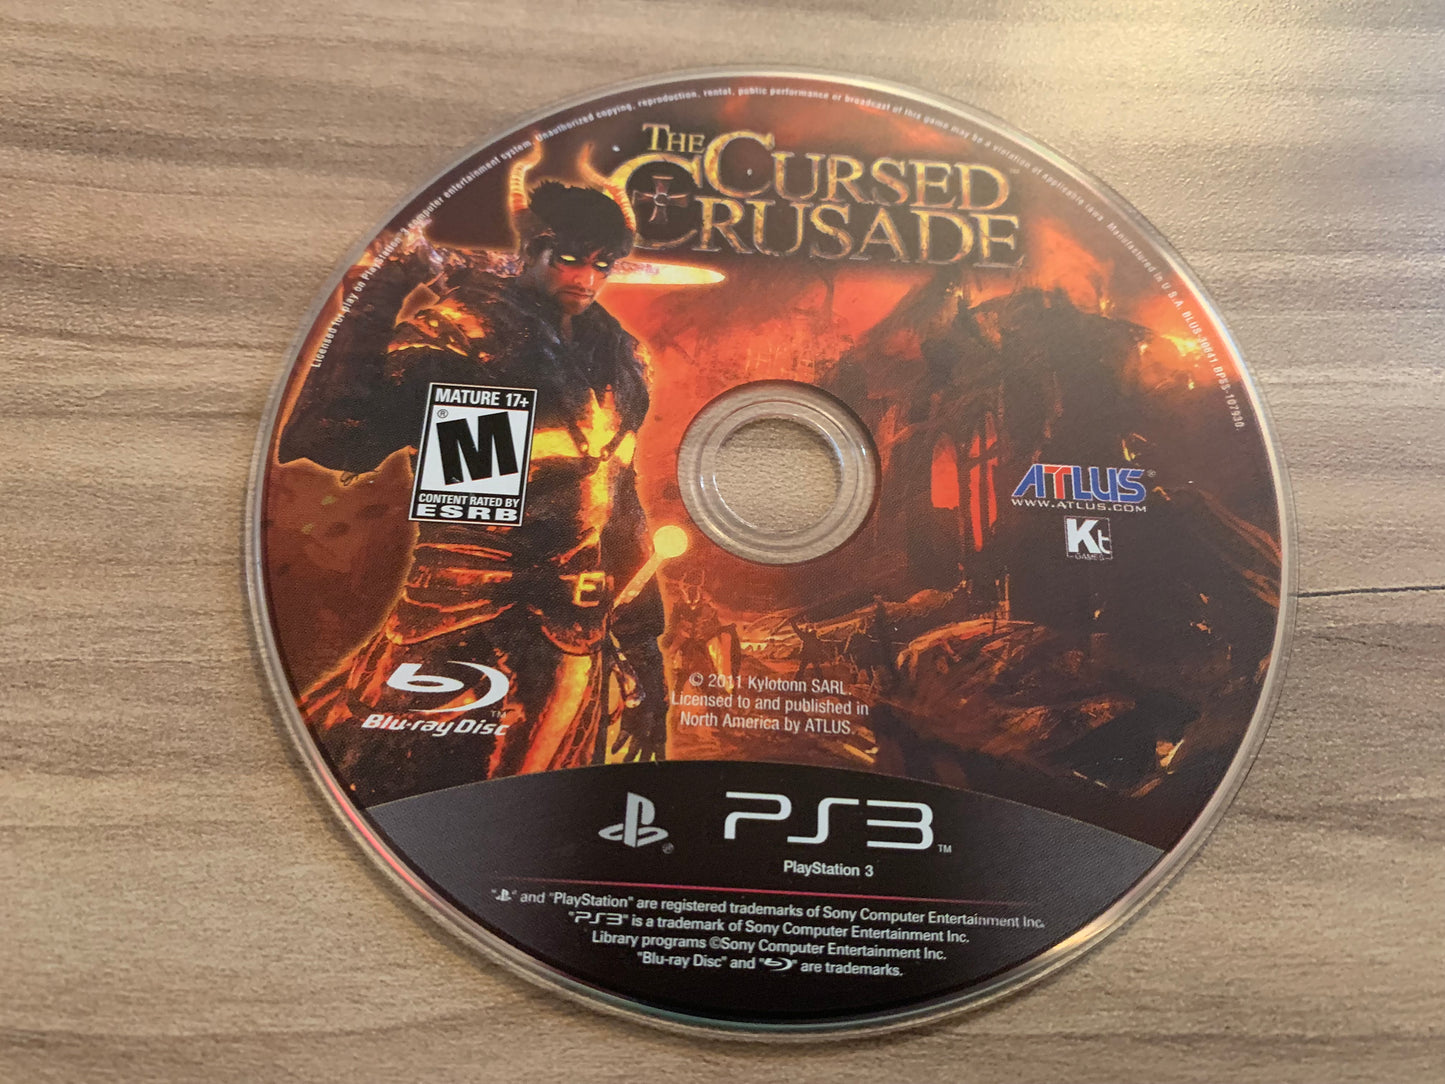 SONY PLAYSTATiON 3 [PS3] | THE CURSED CRUSADE